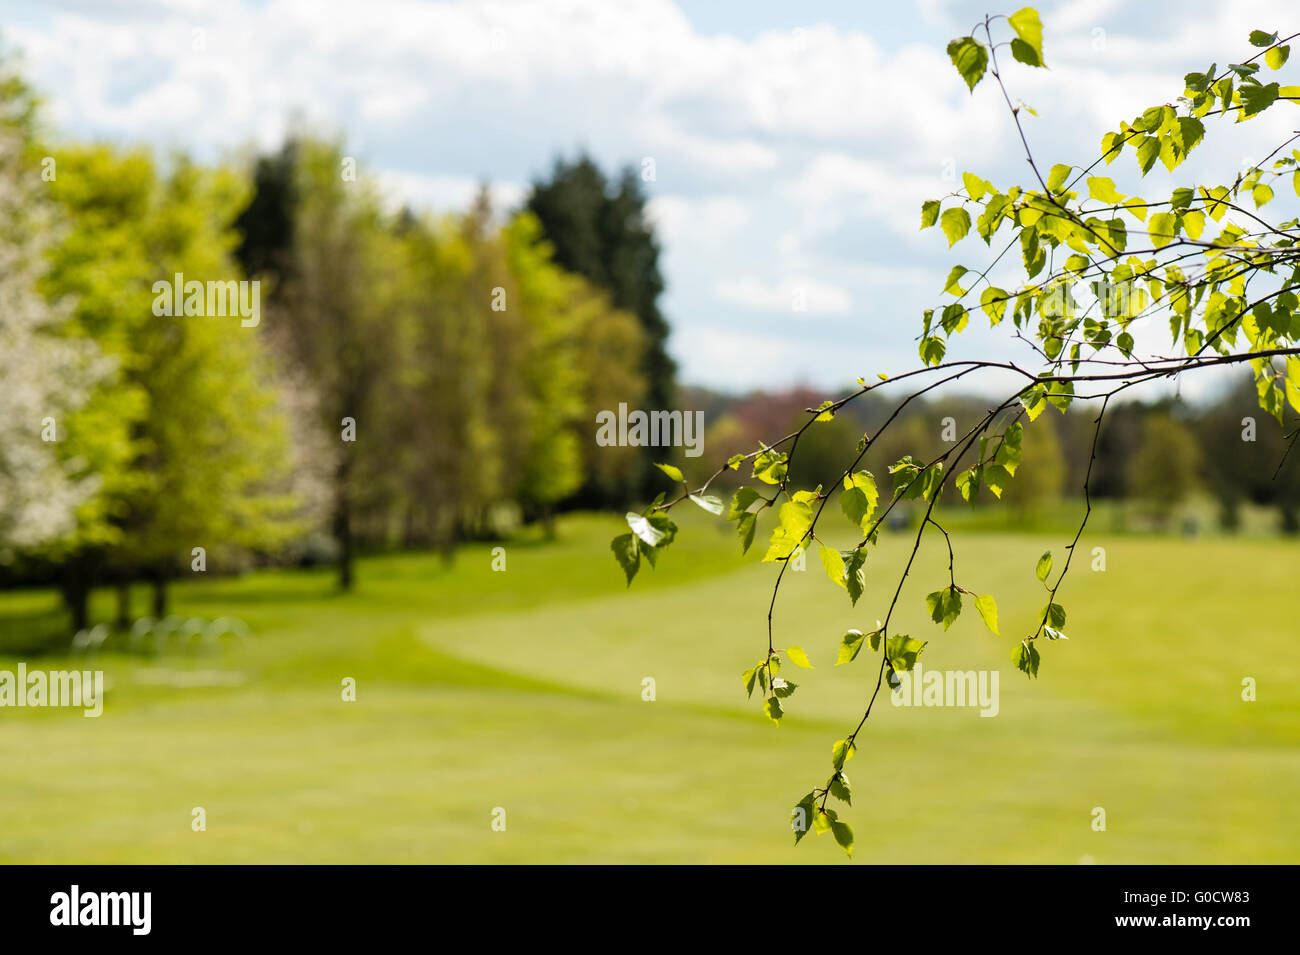 Golf Course Fairway In Springtime Lined With Trees Stock Photo